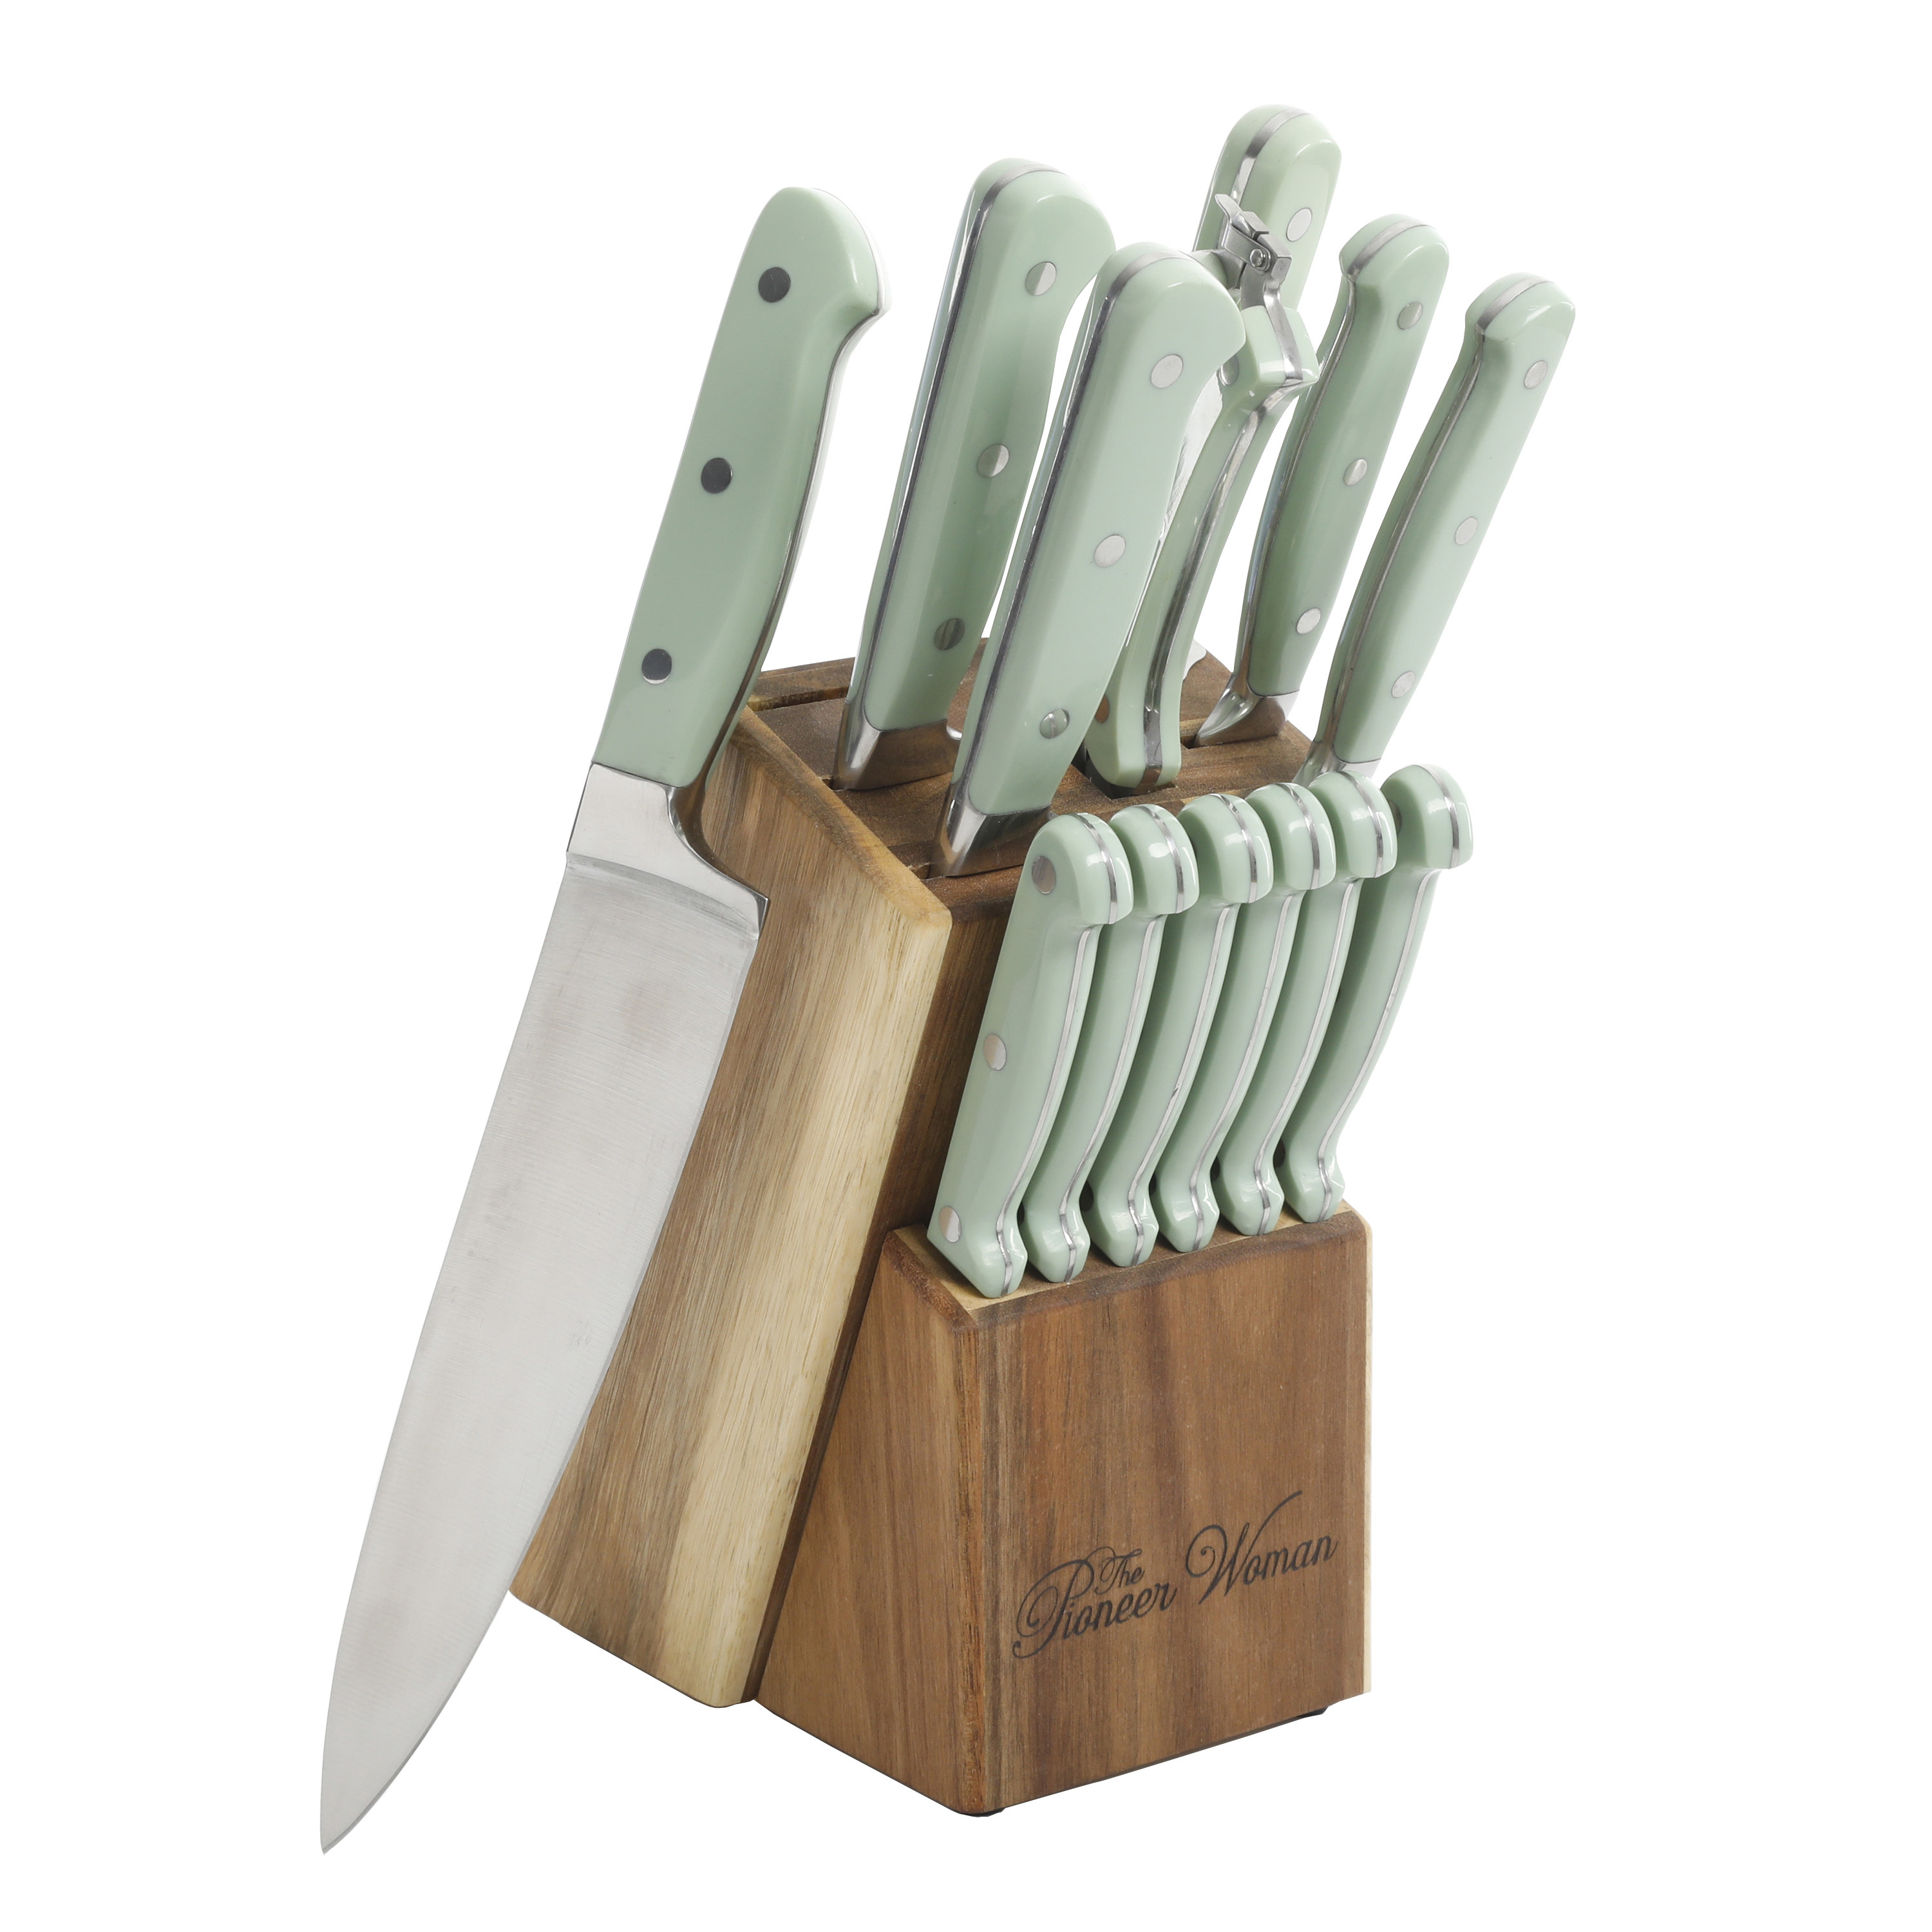 the knife set in mint